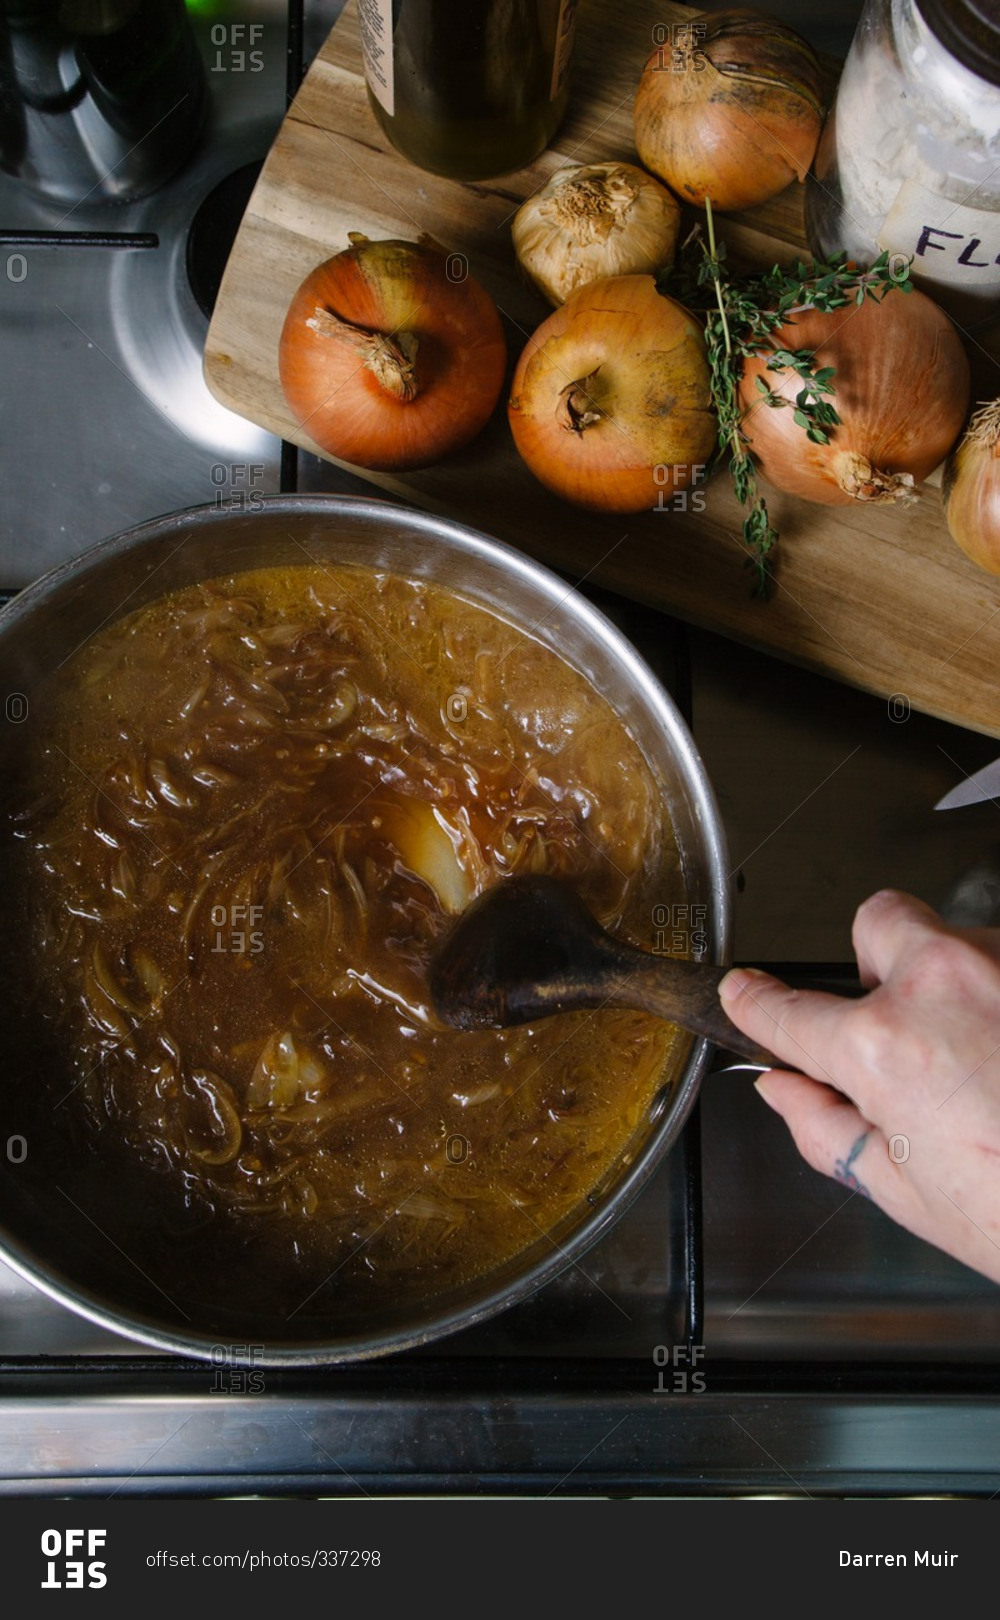 Hand stirring French onion soup in a sauce pan